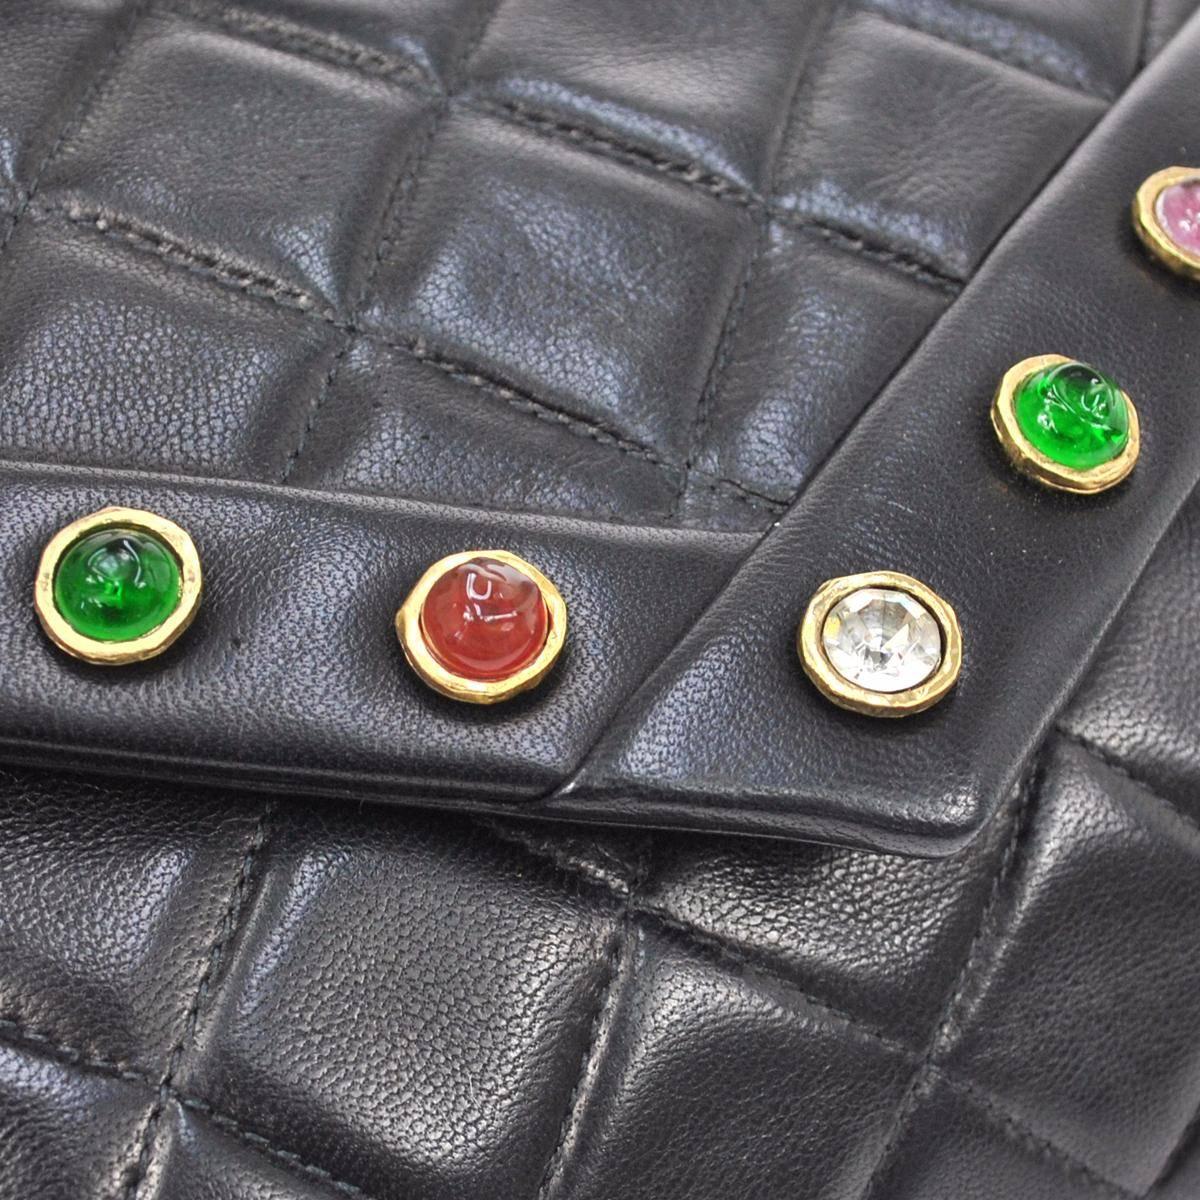 CURATOR'S NOTES

Chanel Vintage Rare Black Lambskin Multi Color Gripoix Evening Clutch Flap Bag 

Lambskin
Gripoix
Gold tone hardware 
Date code 0466217
Made in Italy
Shoulder strap drop 18"
Measures 8" W x 6" H x 2" D 
Includes